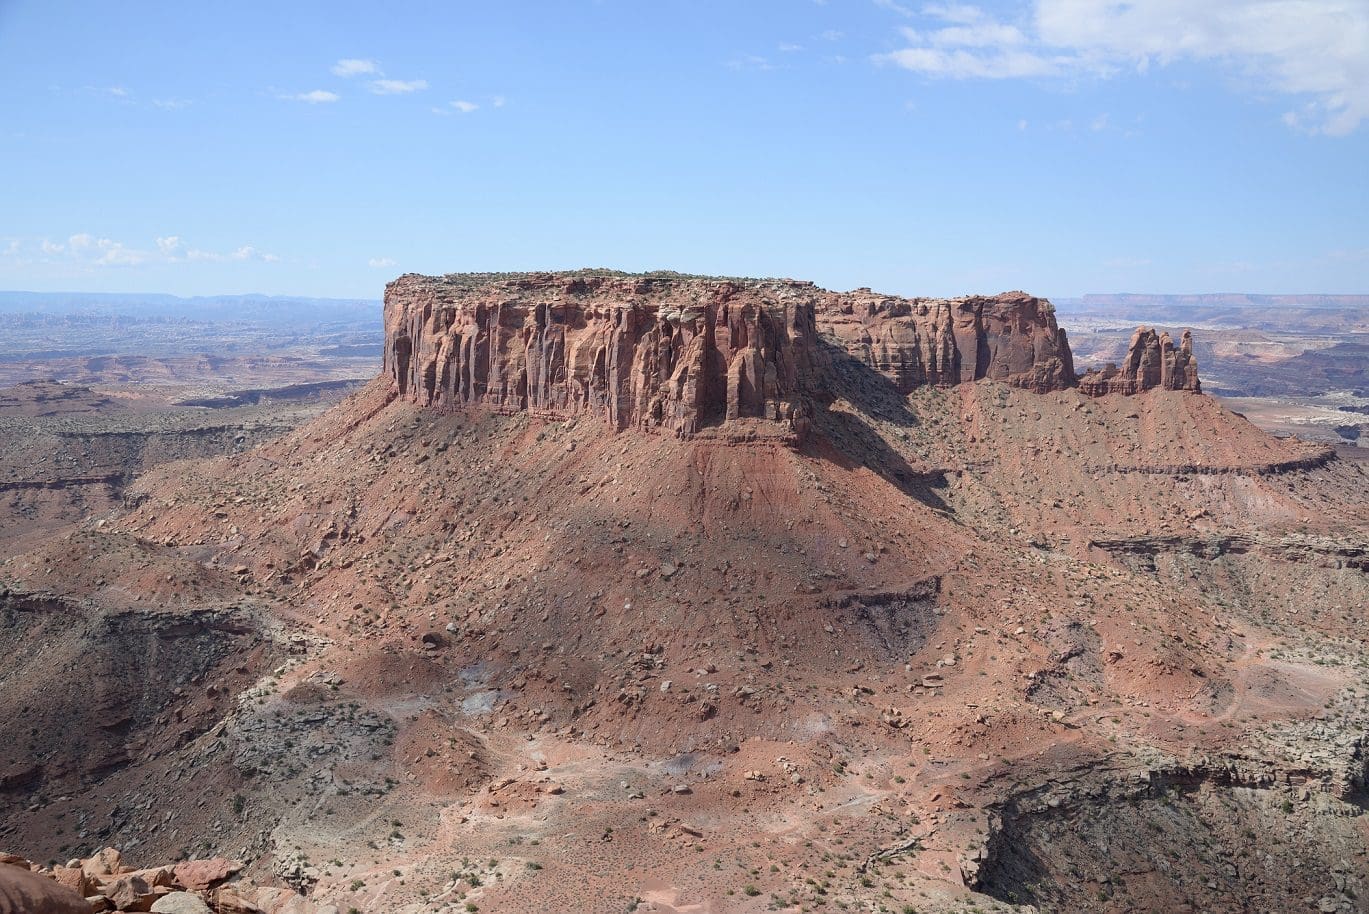 How Do I Get to the Island in the Sky at Canyonlands?